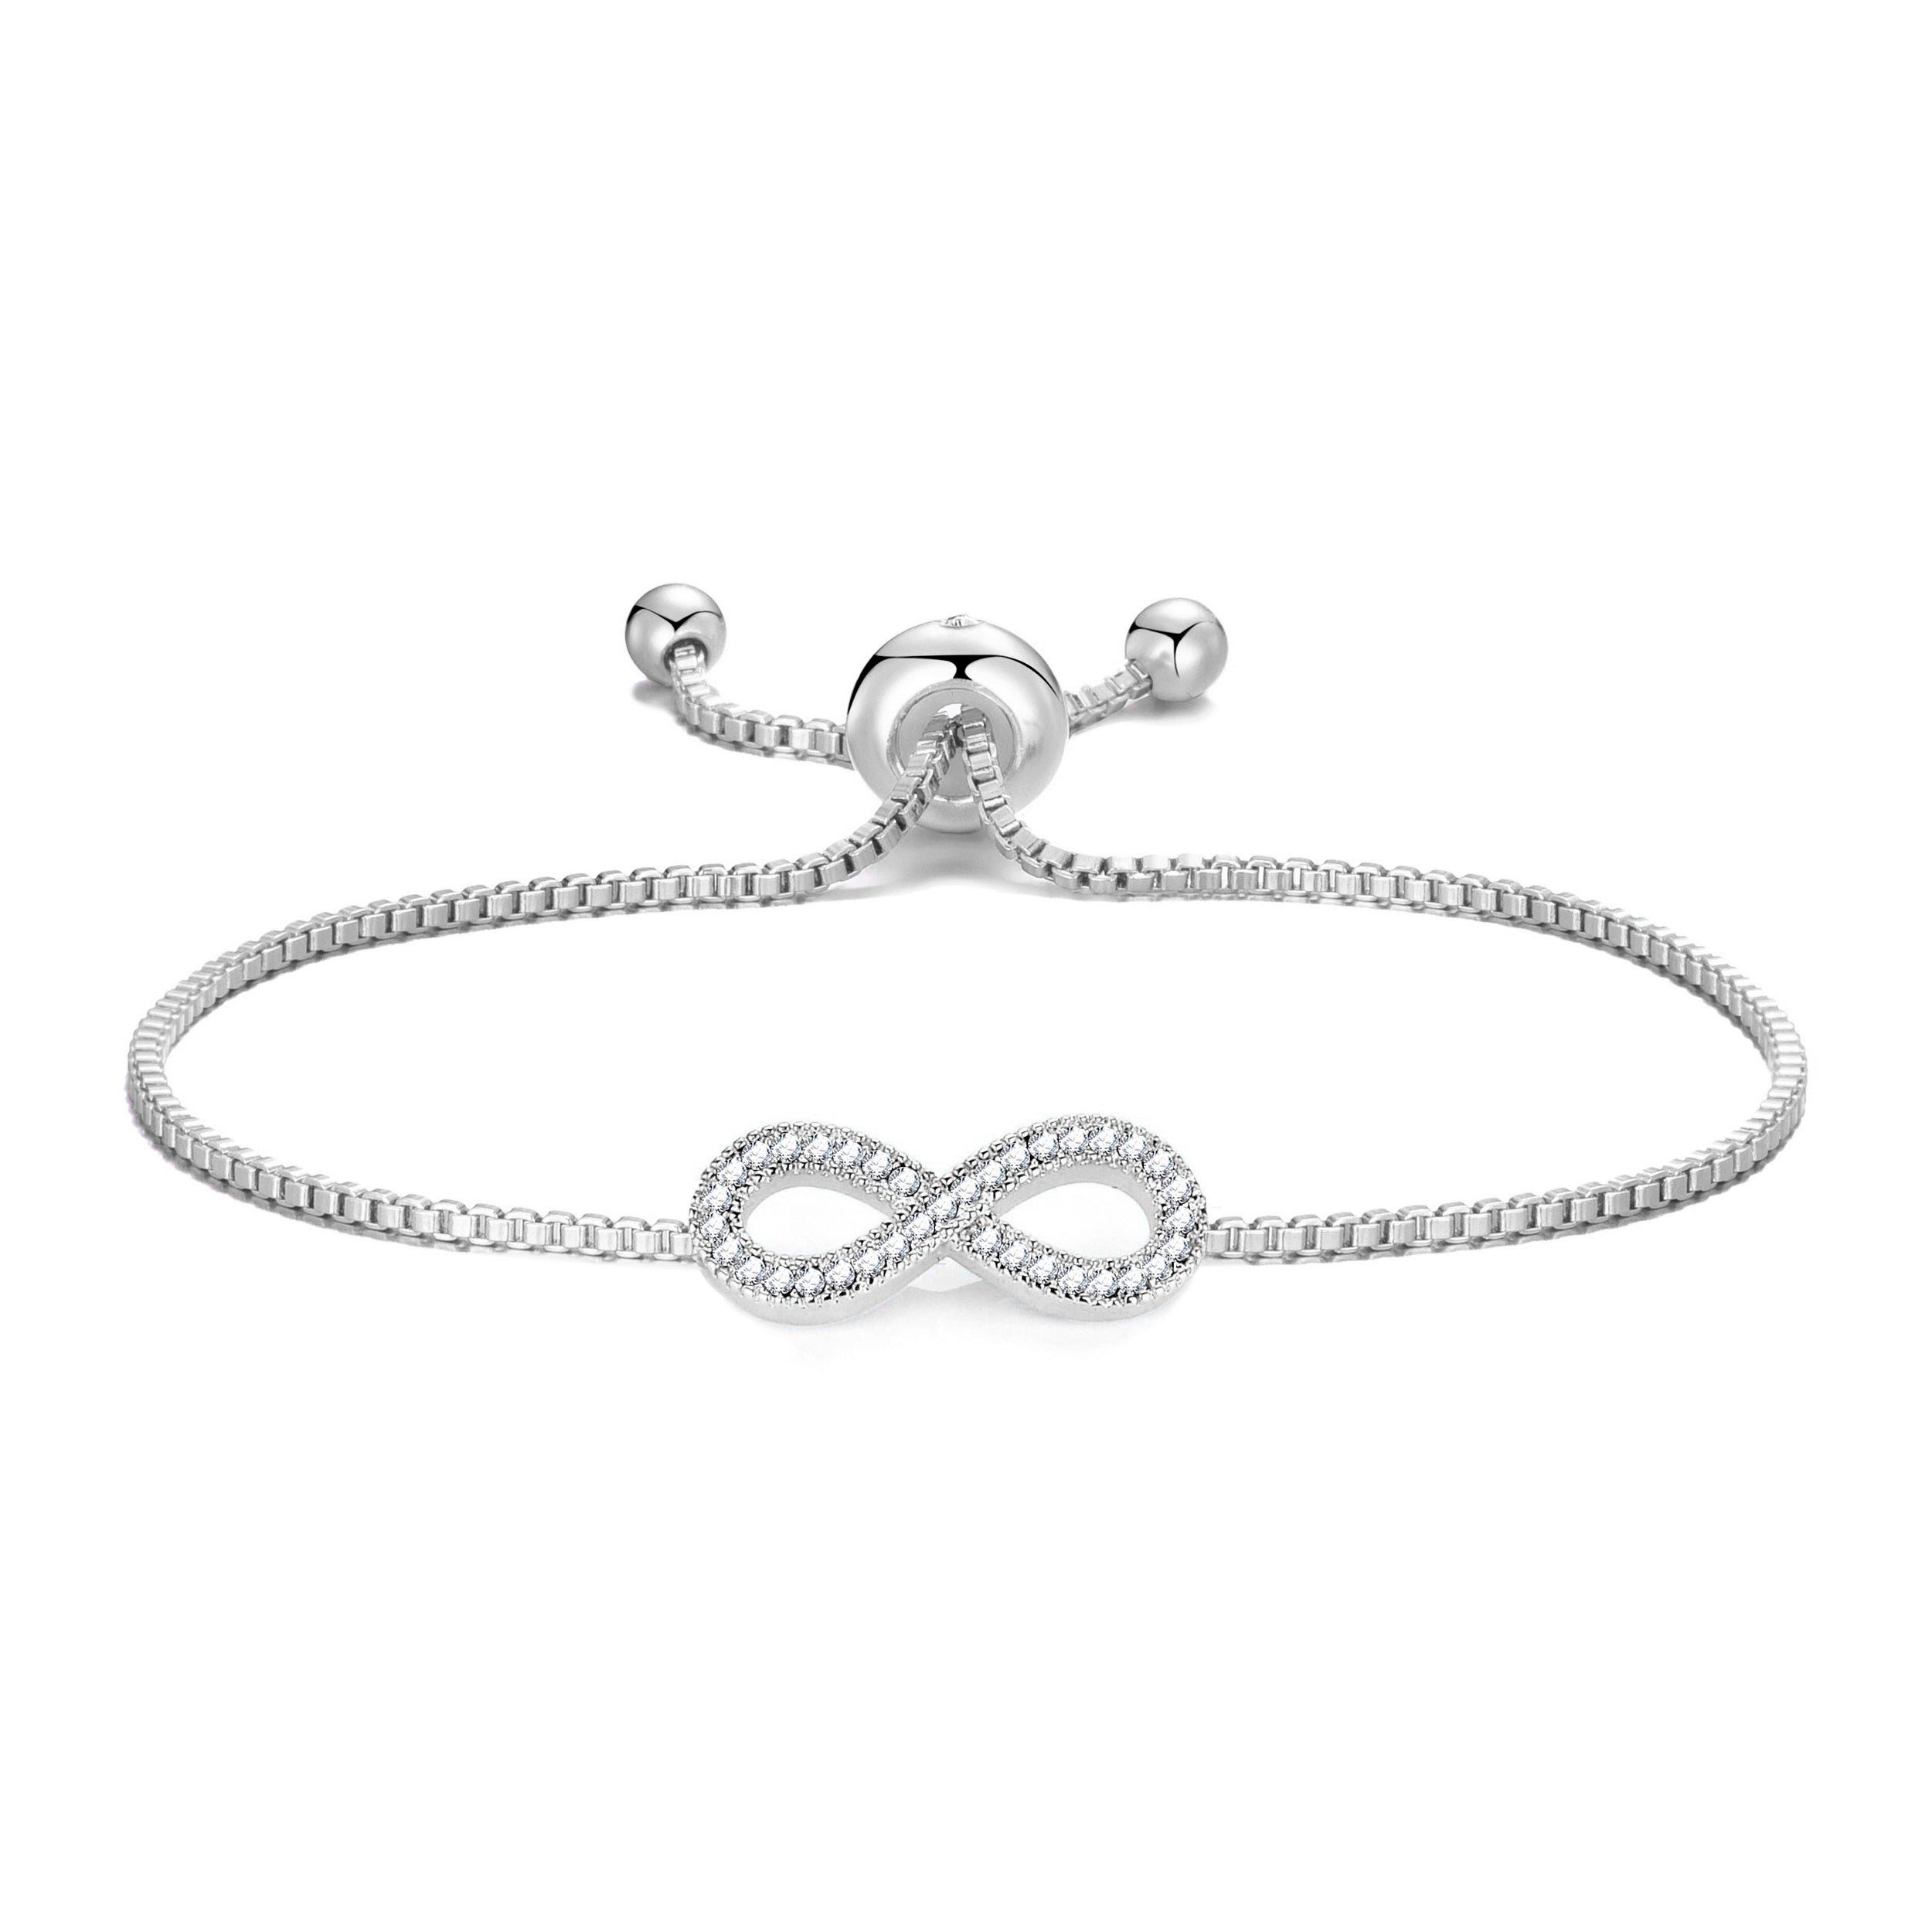 Silver Plated Infinity Friendship Bracelet Created with Zircondia® Crystals by Philip Jones Jewellery